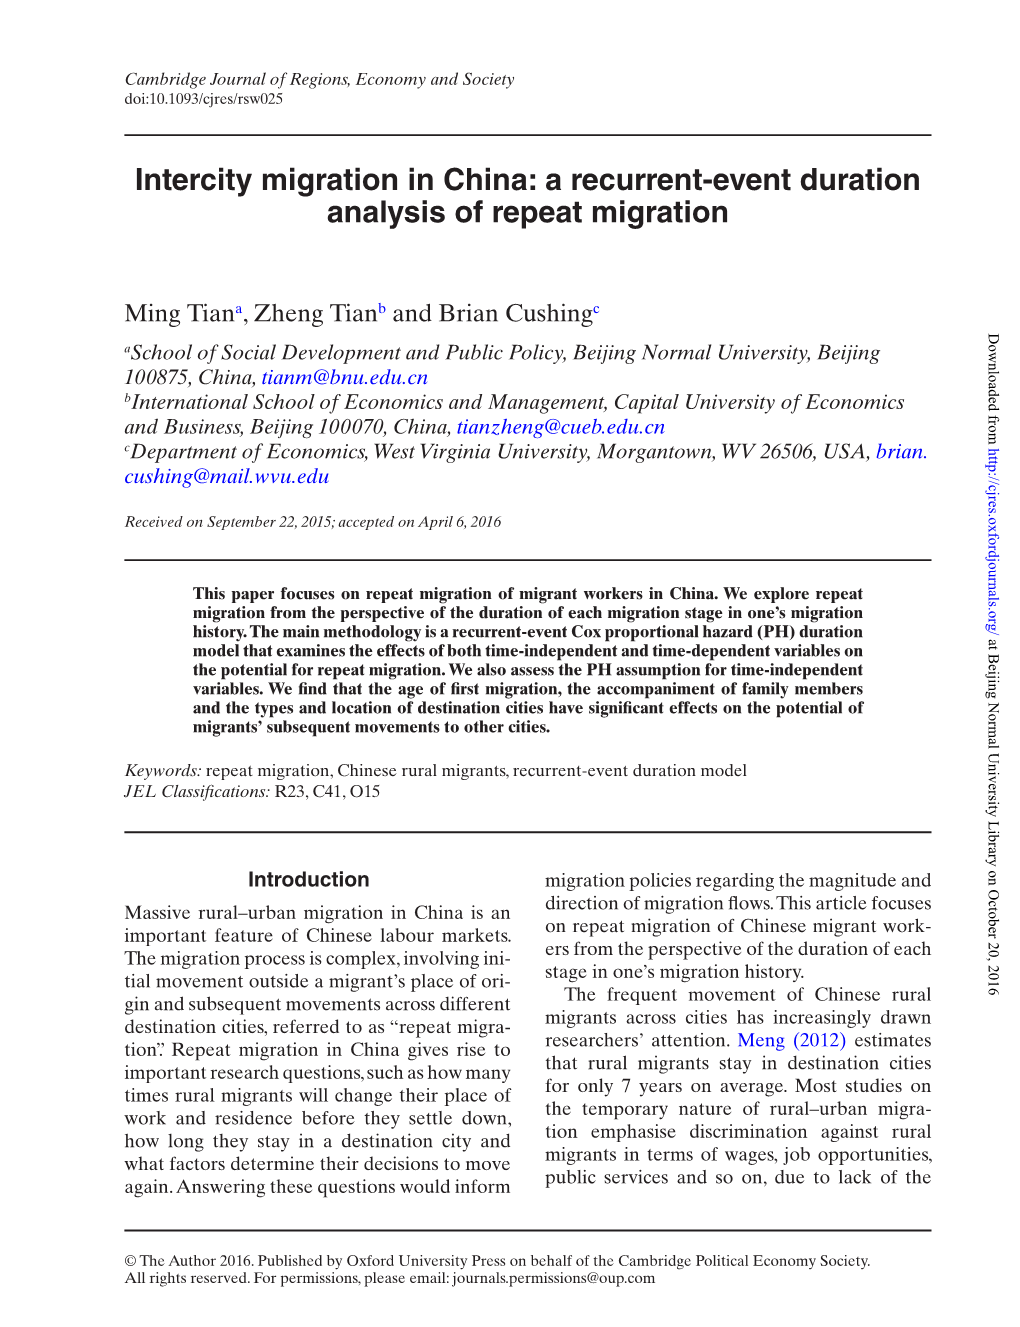 Intercity Migration in China: a Recurrent-Event Duration Analysis of Repeat Migration